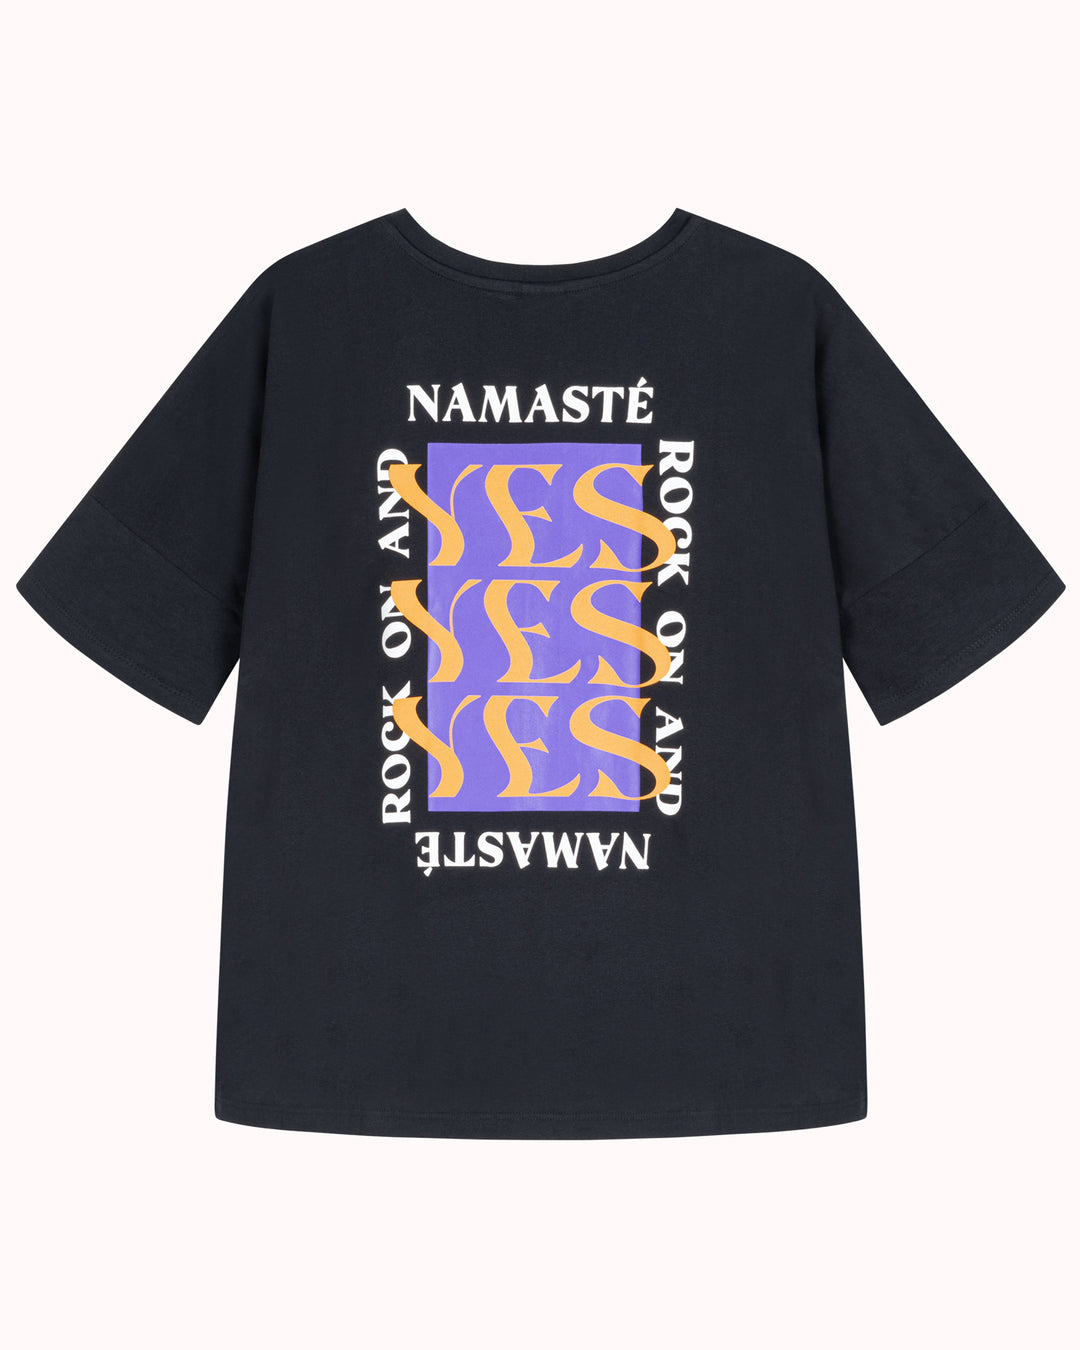 YES YES YES T-Shirt Black